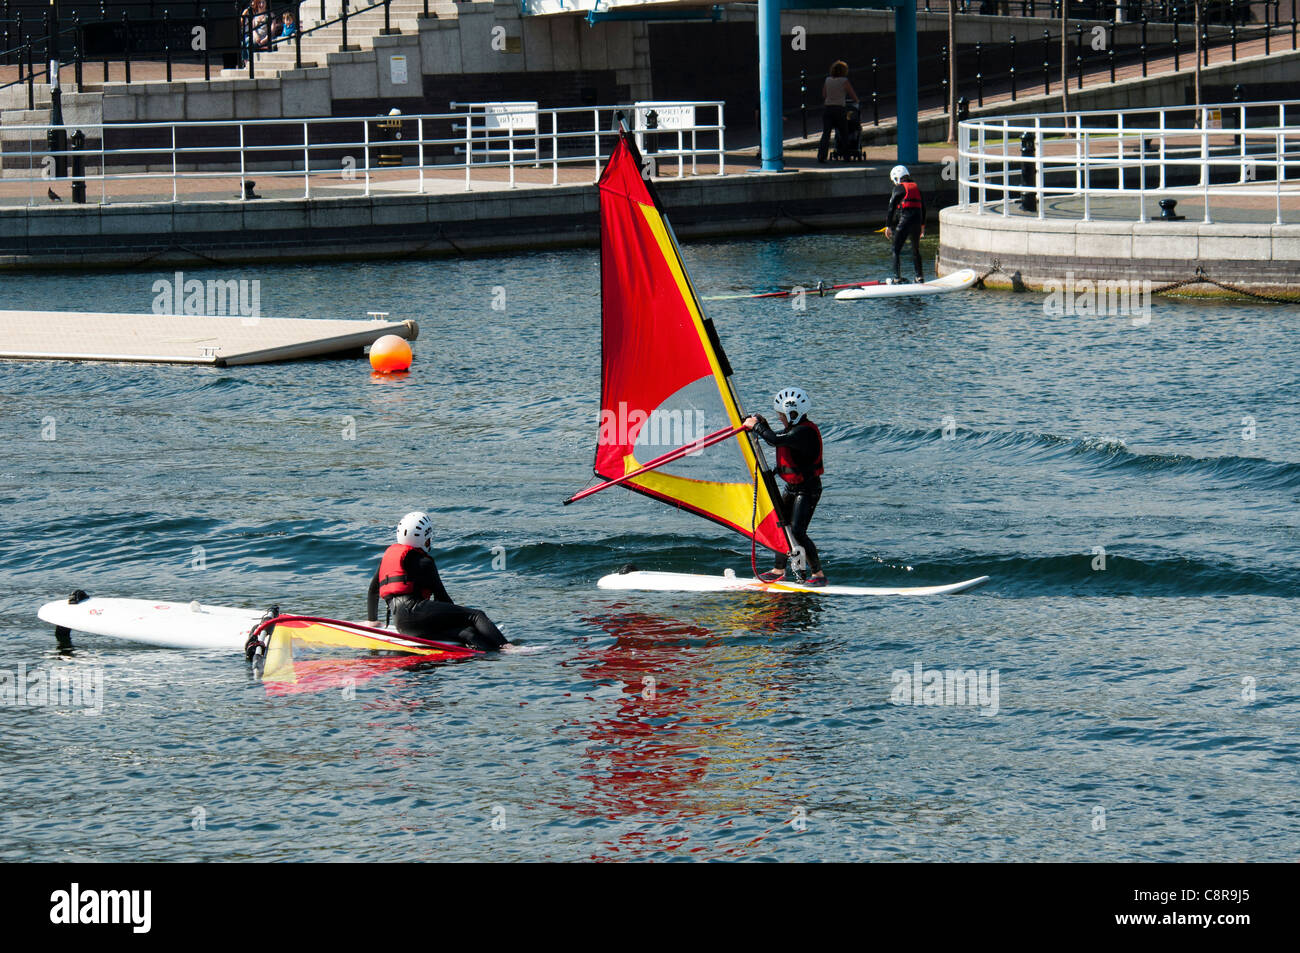 Children practicing windsurfing at the Watersports Centre, Salford Quays, Manchester, England, UK Stock Photo